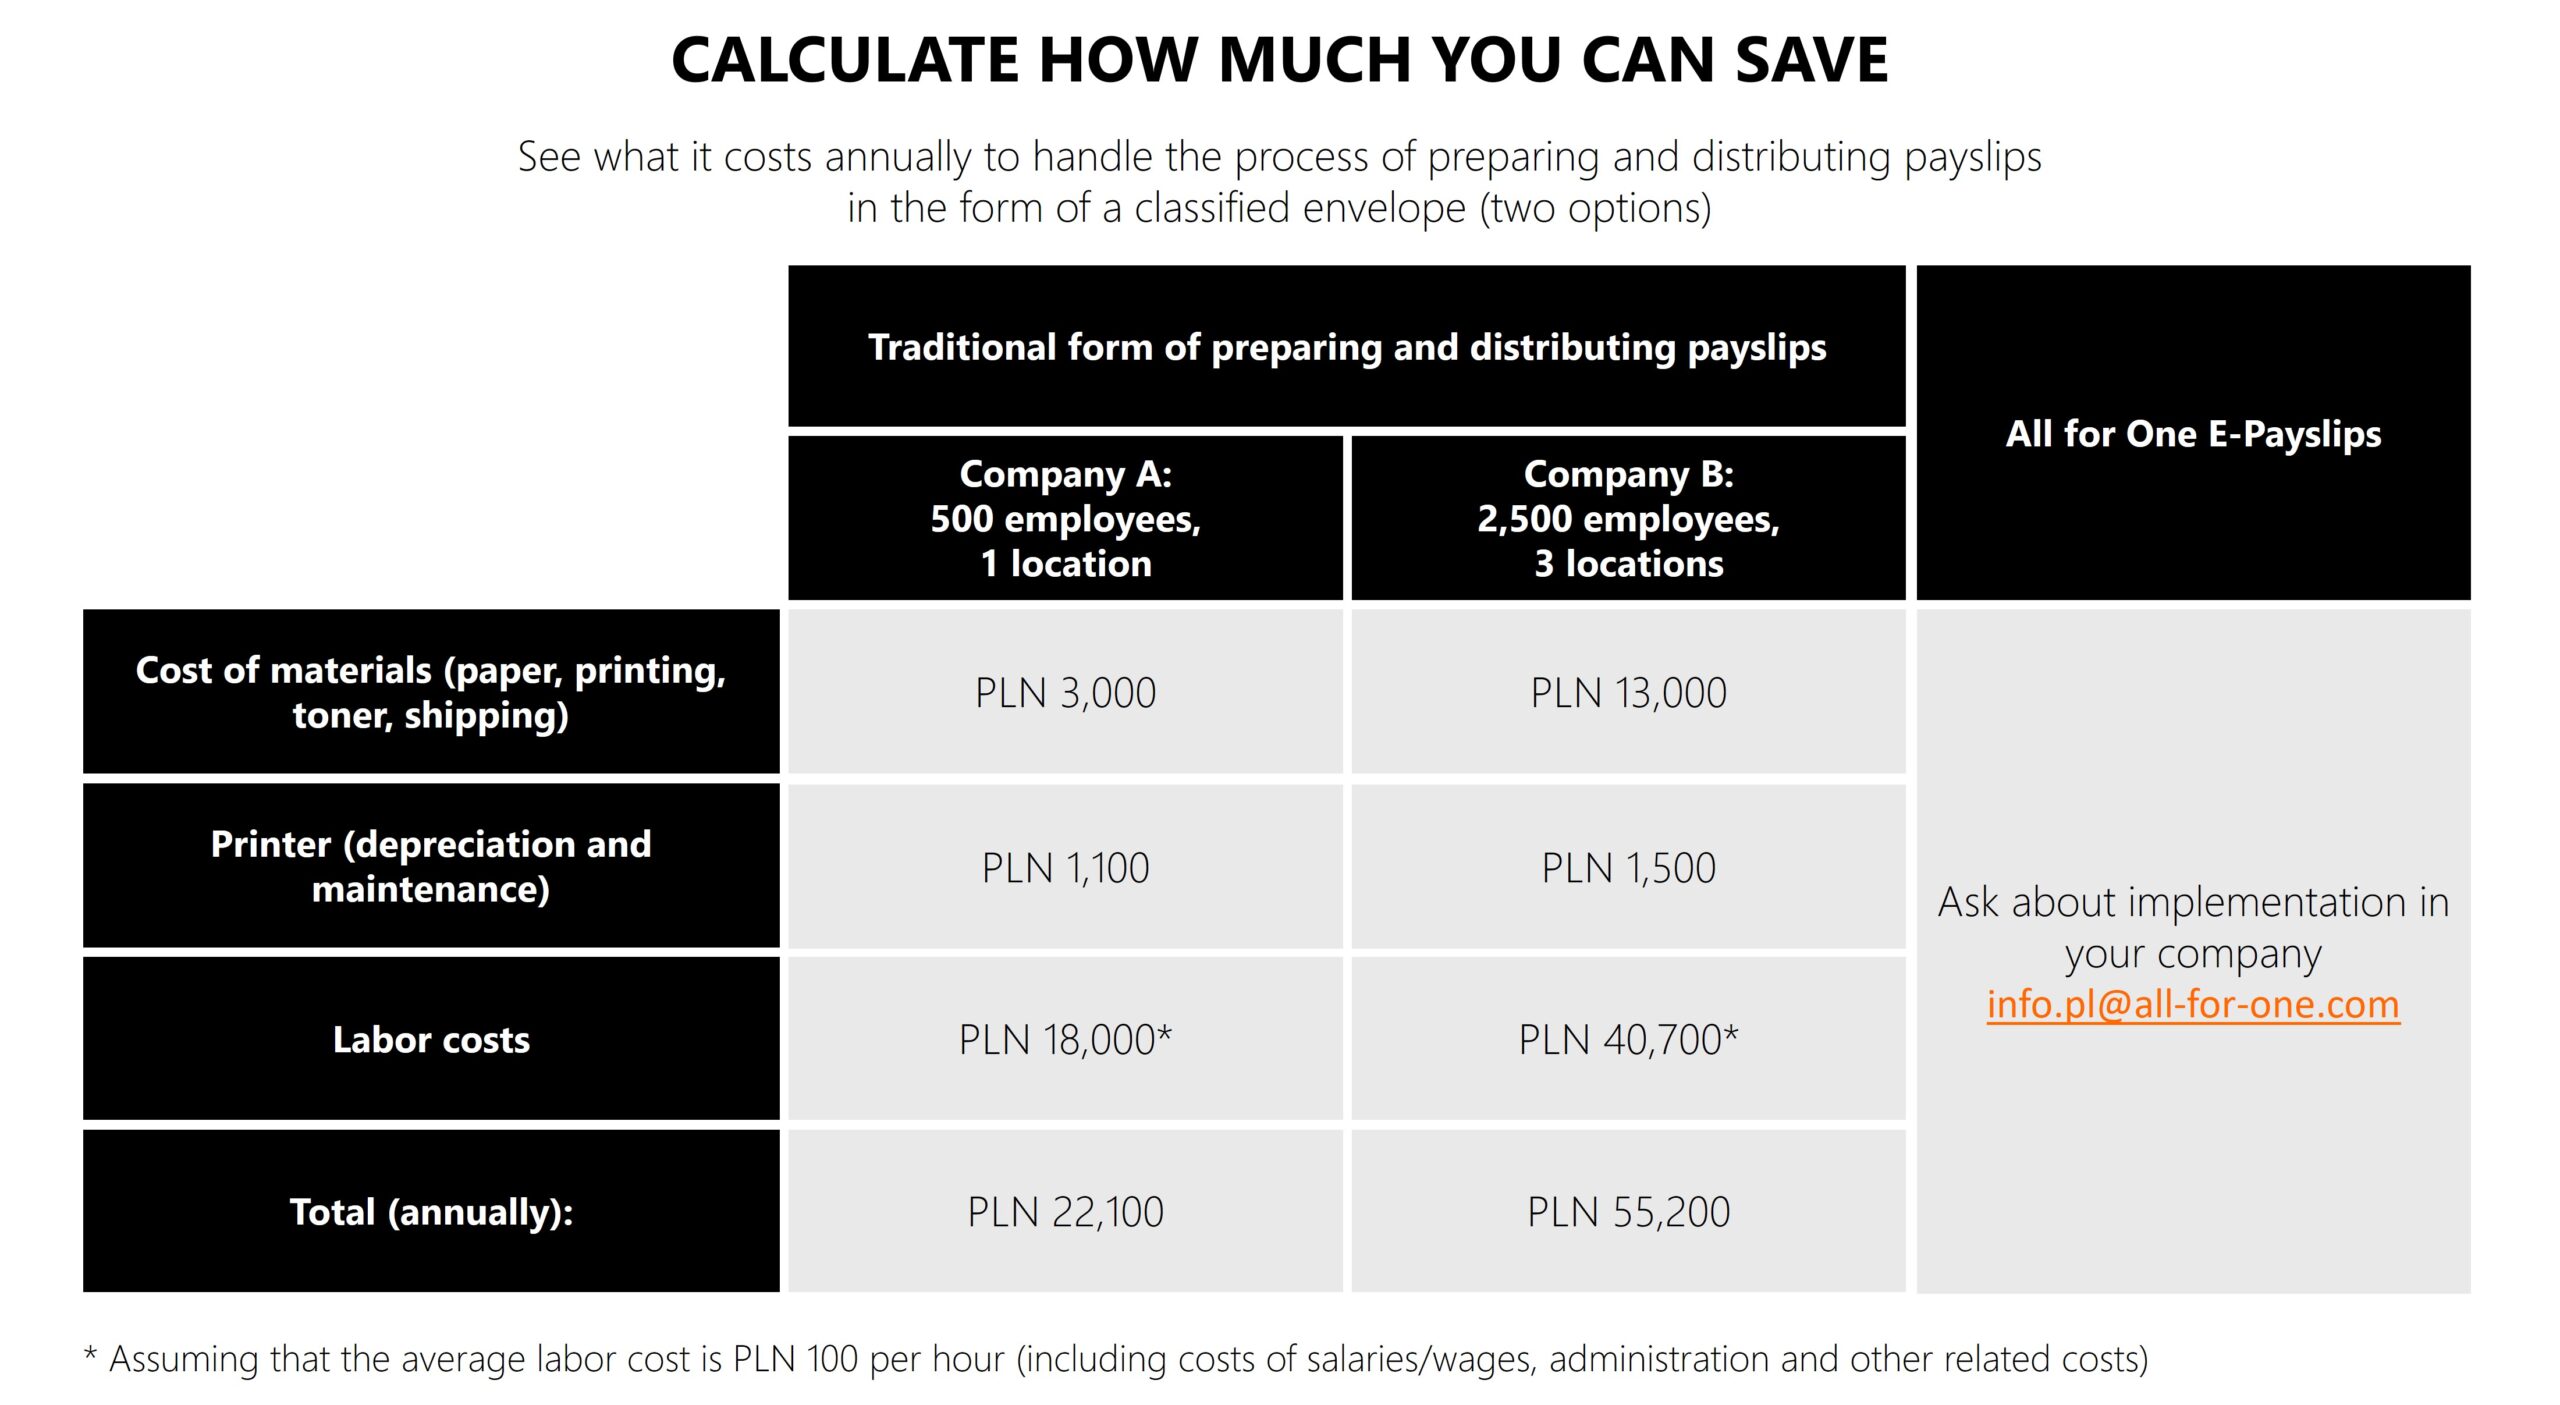 AllforOne E-payslips_calculate how much you can save